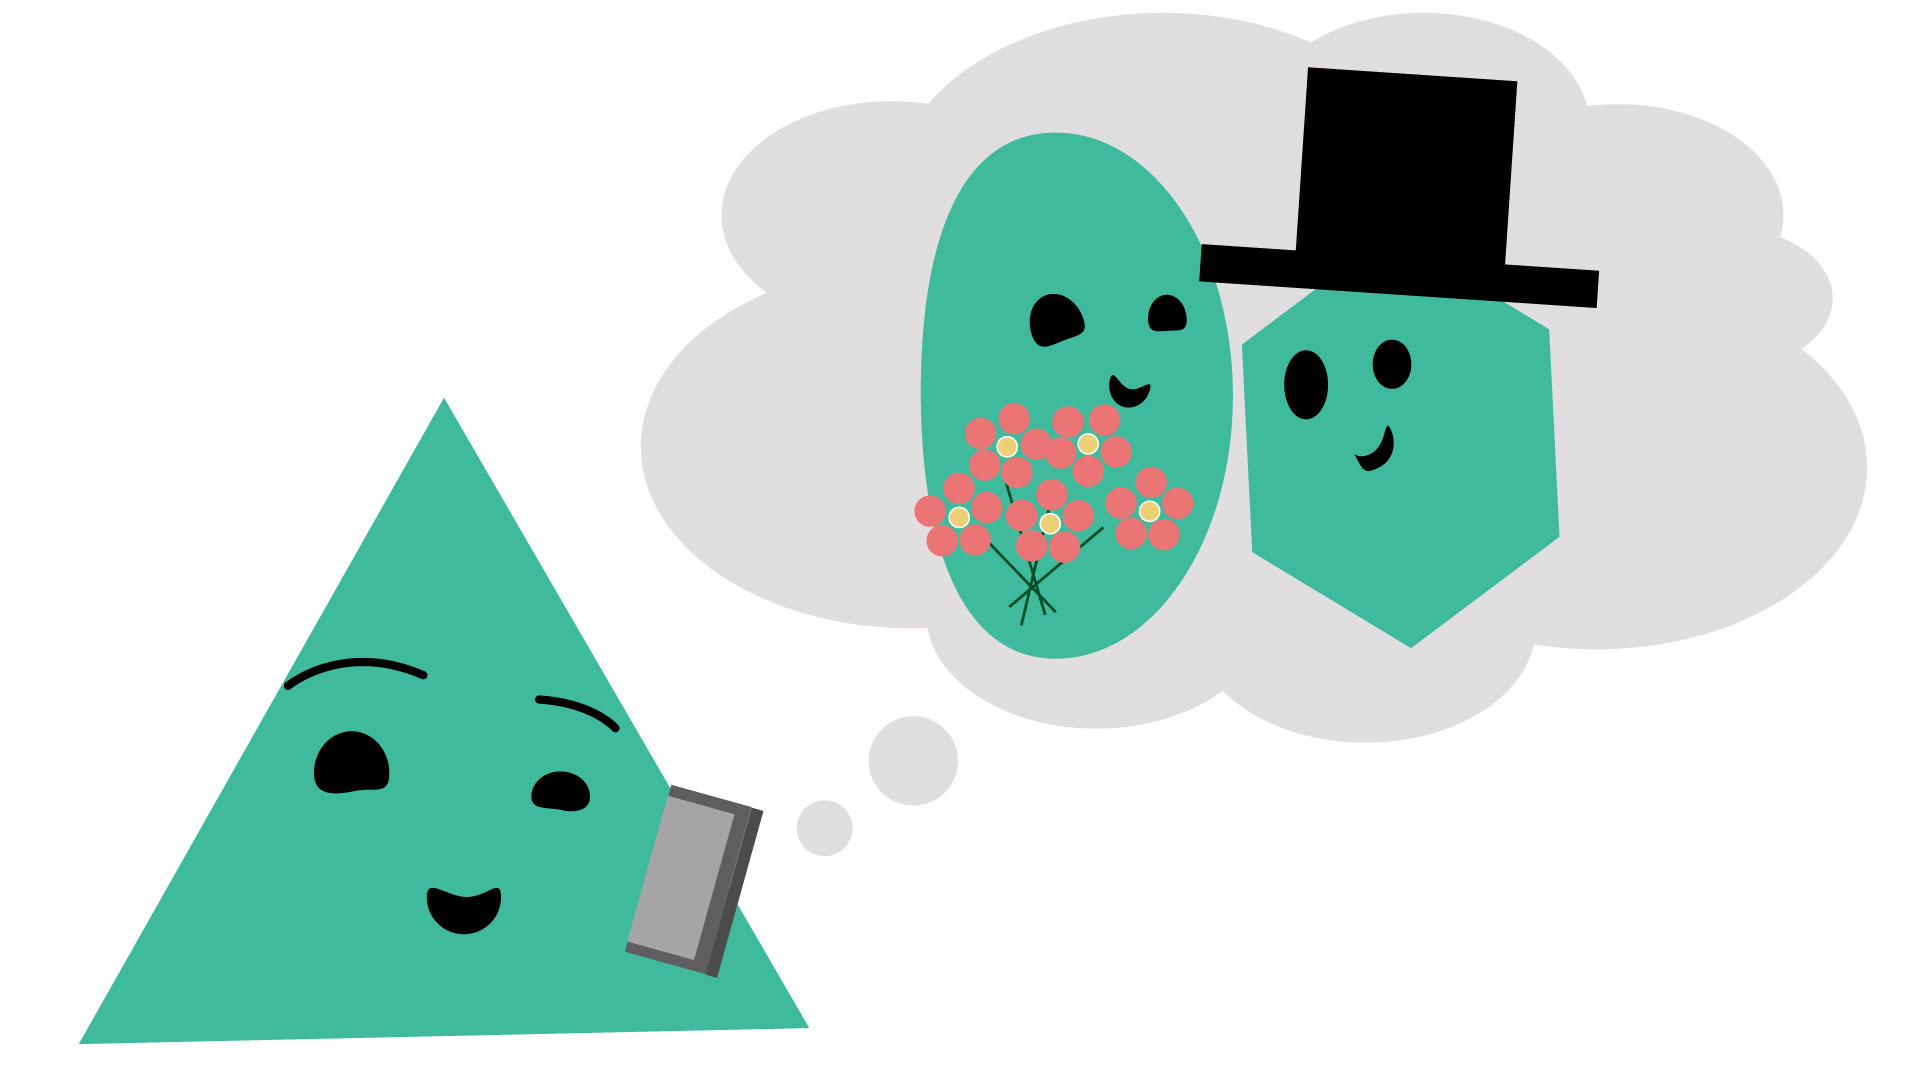 An anthropomorphic triangle with a thought bubble of two anthropomorphic shapes getting joined in marriage